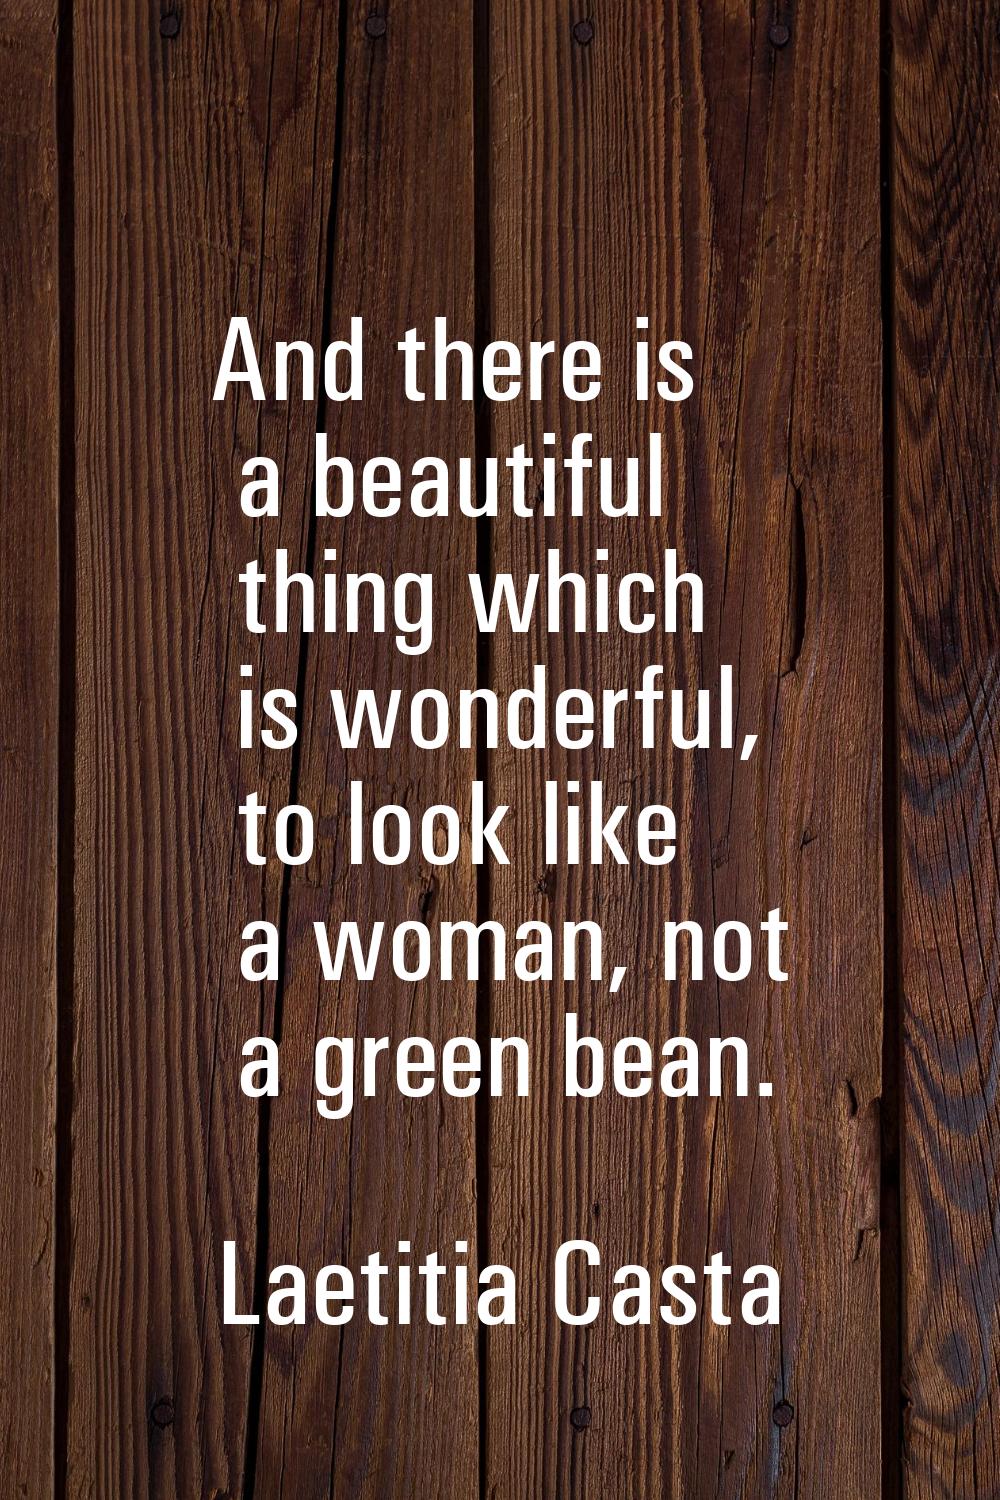 And there is a beautiful thing which is wonderful, to look like a woman, not a green bean.